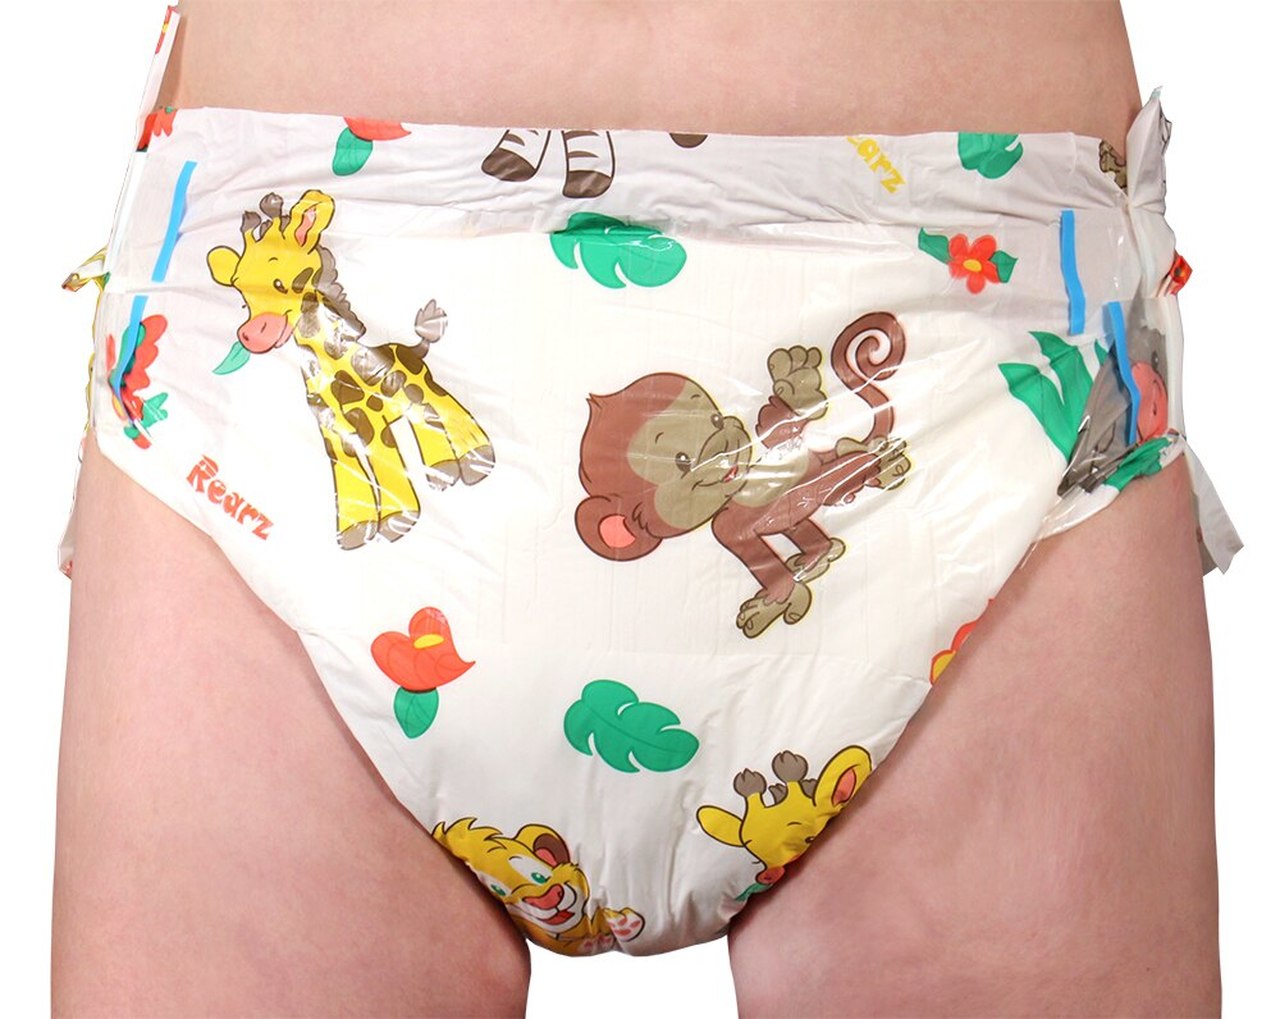 Rearz Mega Diapers - Experience the latest in ABDL diaper innovation. -  Rearz Inc.